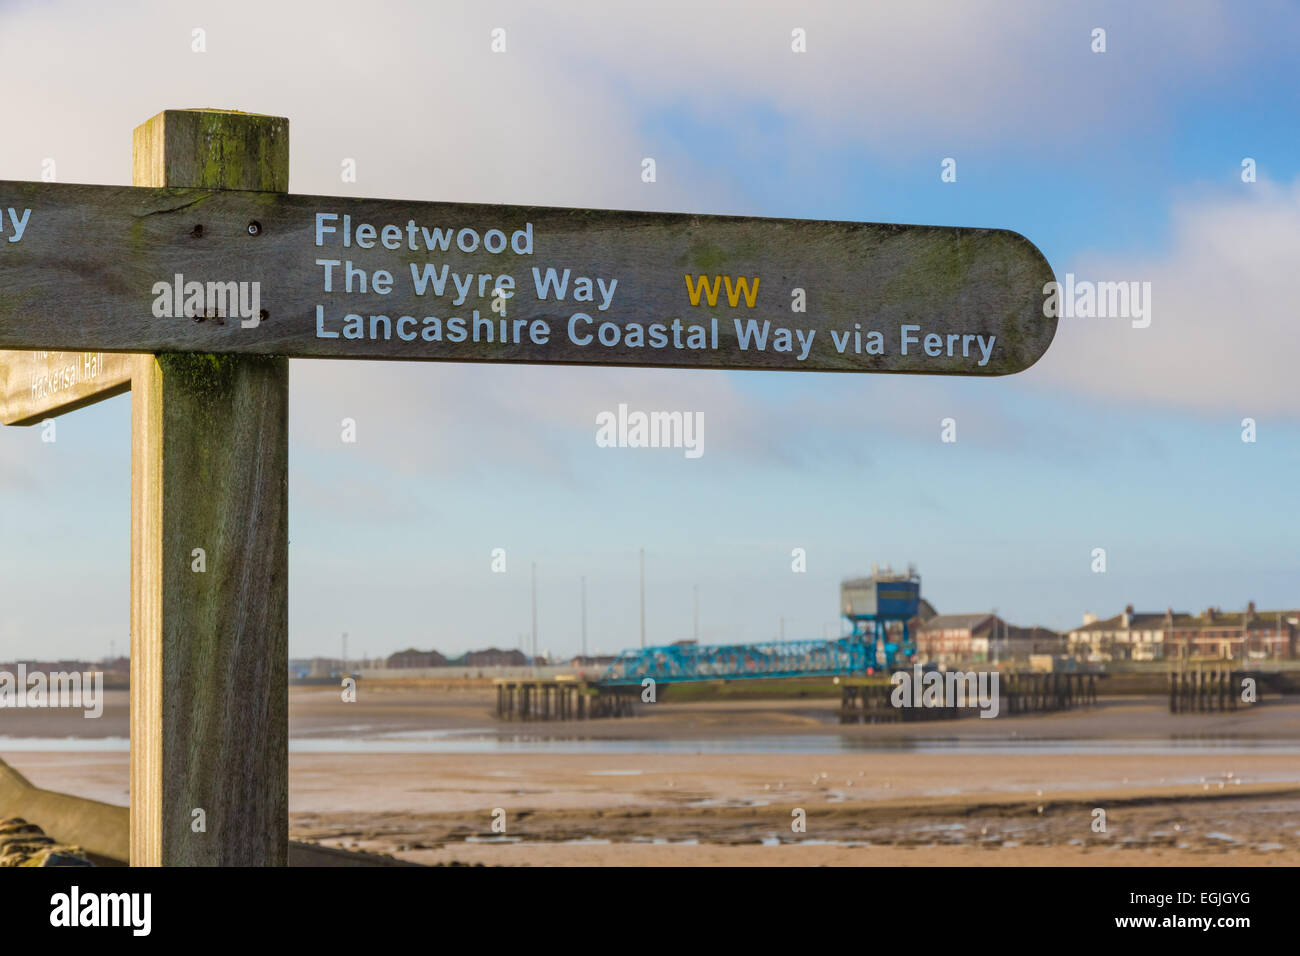 Wooden direction Sign for Fleetwood, Wyre Way, Coastal Ferry Route. Stock Photo